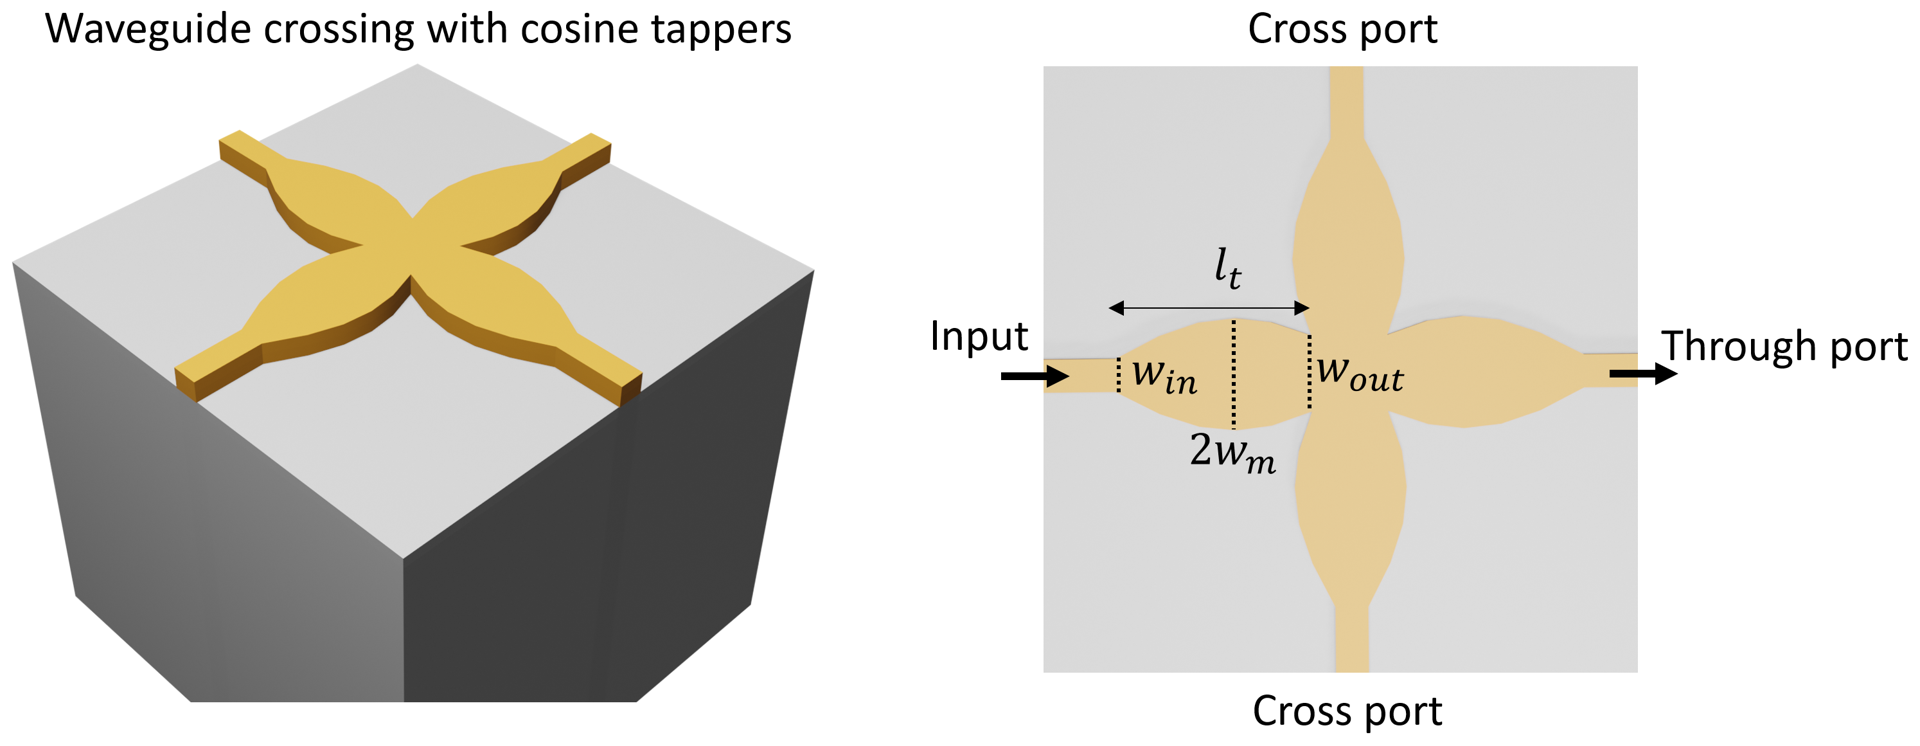 Waveguide crossing based on cosine tapers